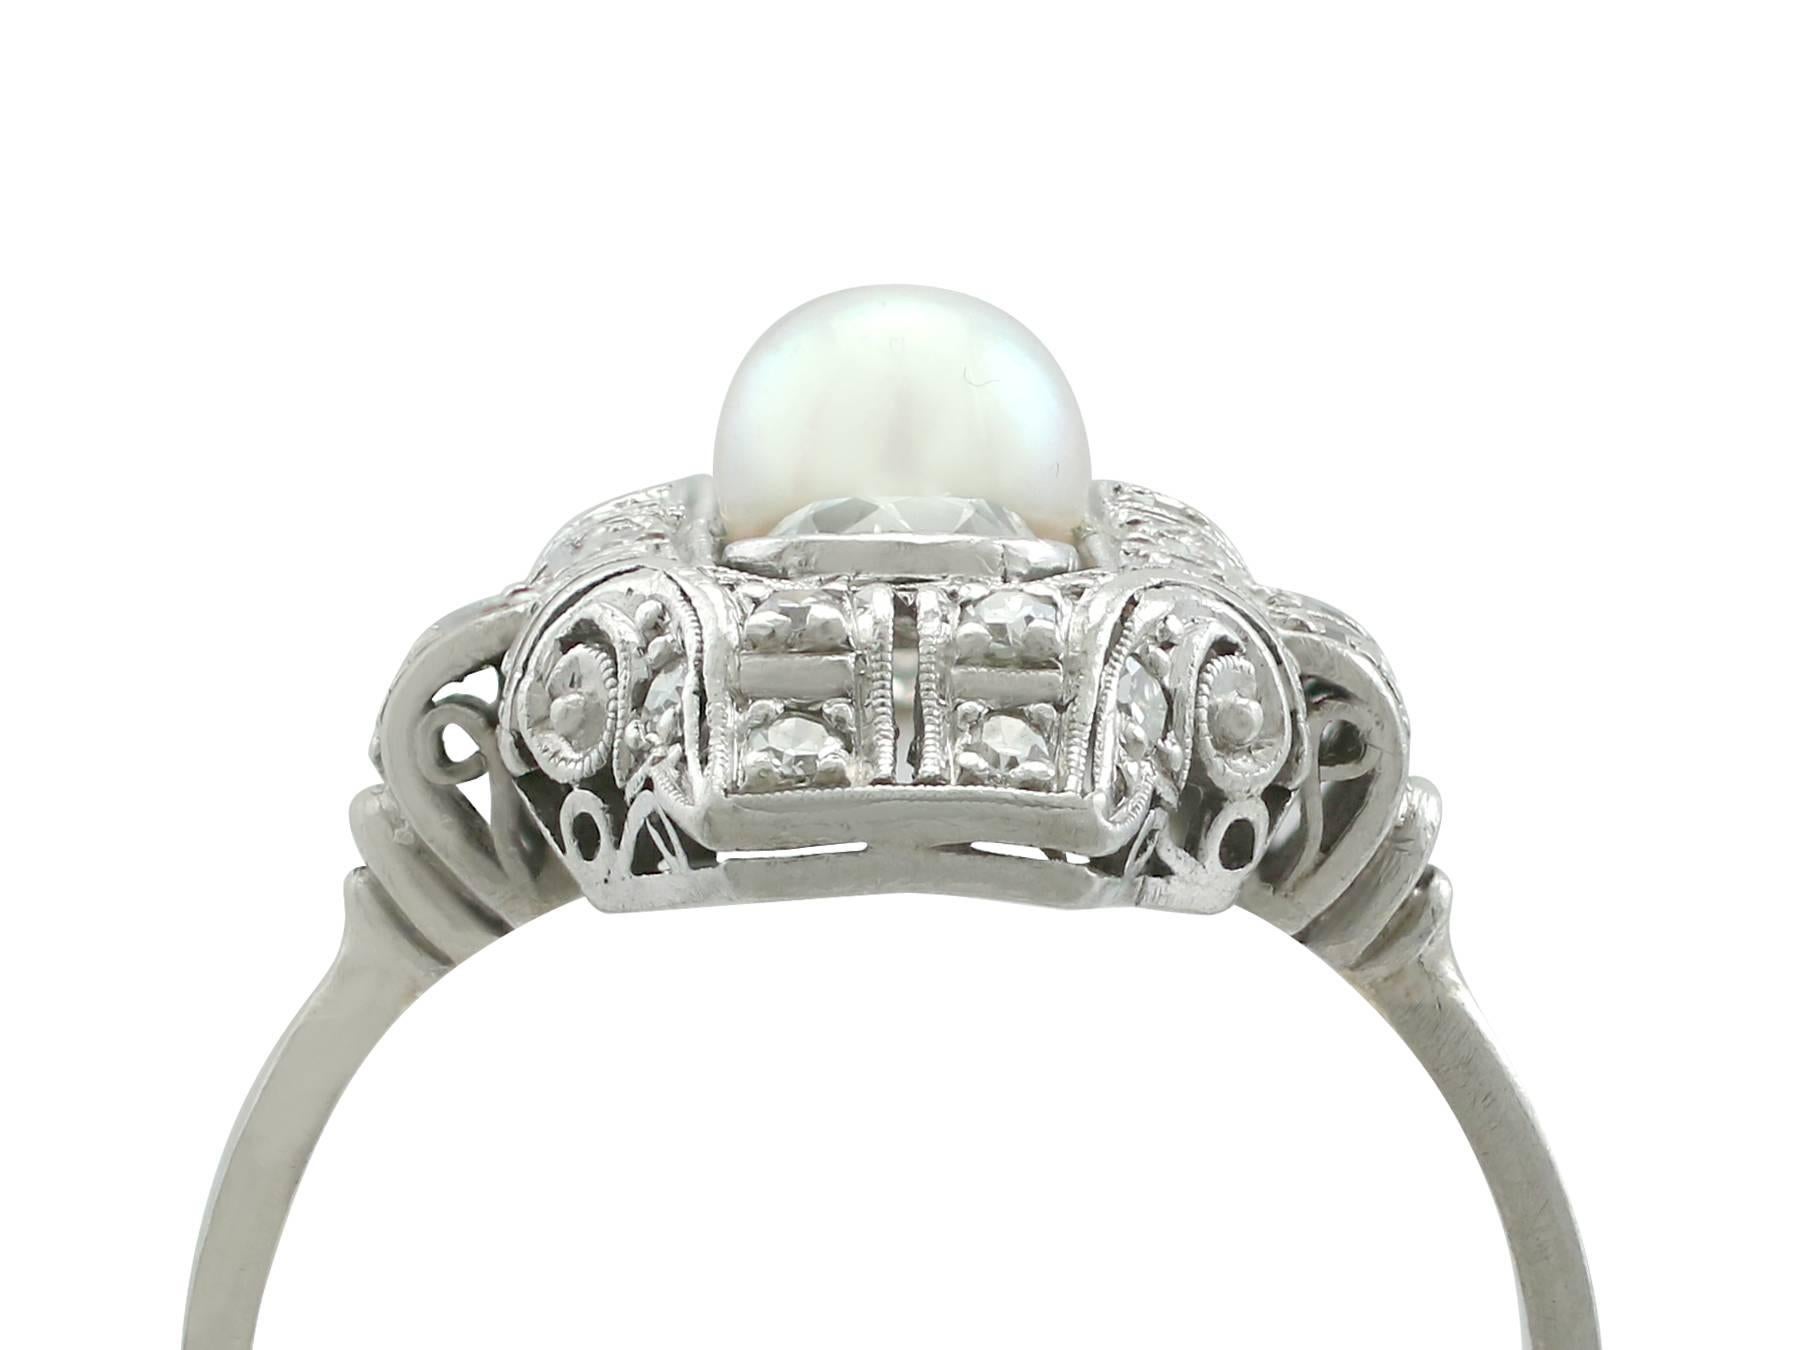 A stunning, fine and impressive vintage Art Deco 1.12 carat diamond, pearl and platinum cocktail ring; part of our diverse pearl jewelry collections

This stunning, fine and impressive pearl and diamond ring has been crafted in platinum.

The